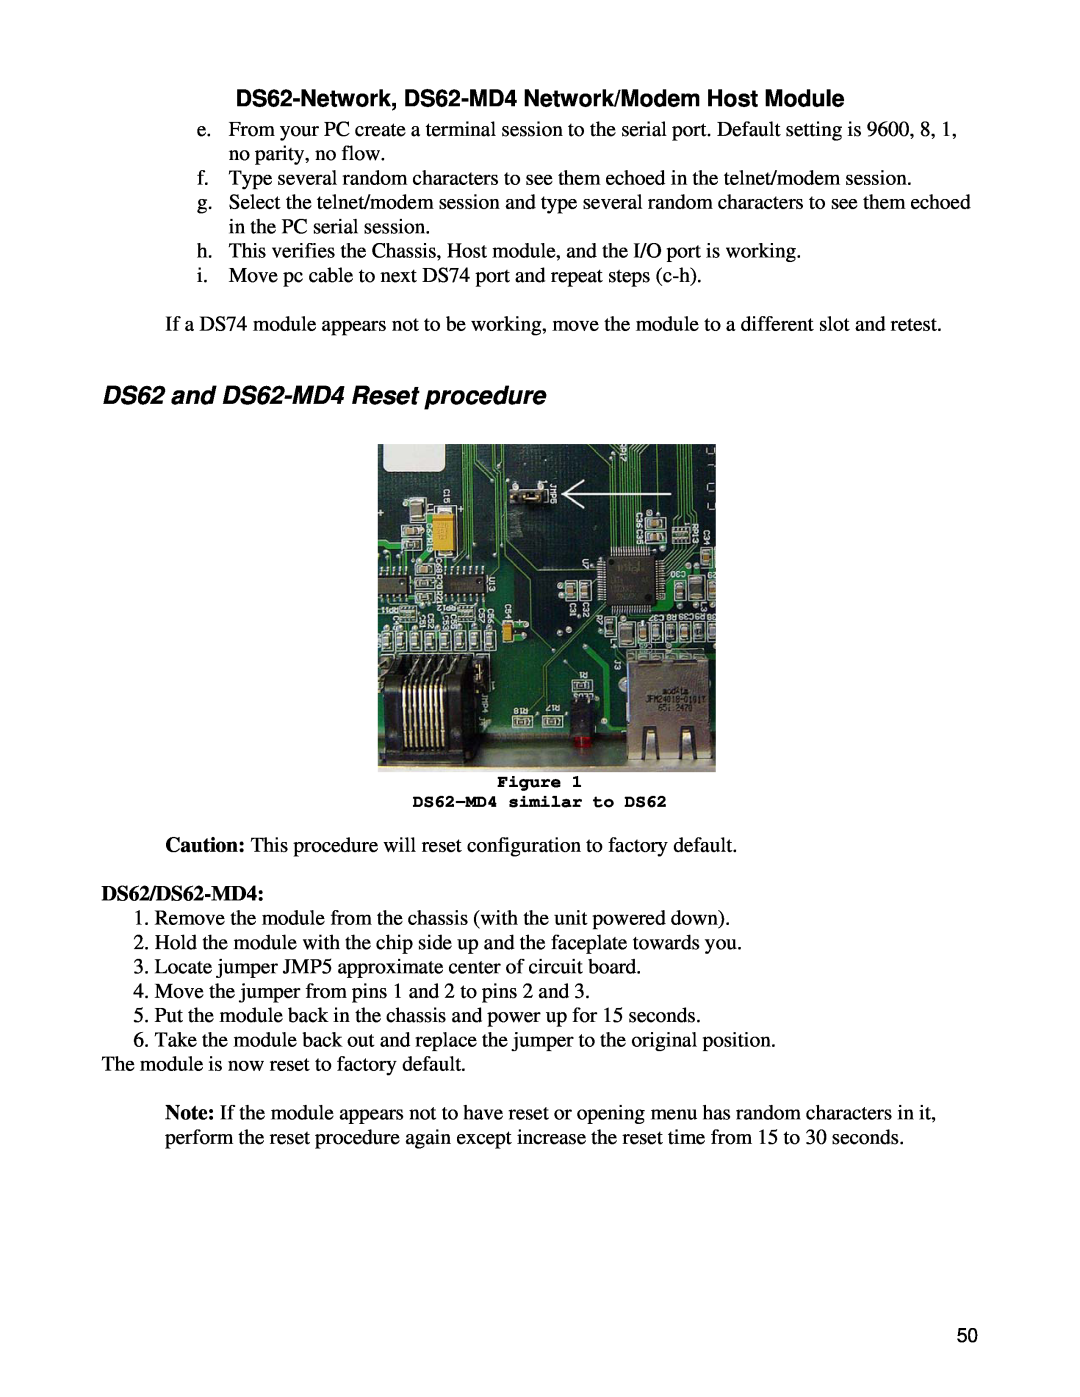 Bay Technical Associates DS Series DS62 and DS62-MD4 Reset procedure, DS62-Network, DS62-MD4 Network/Modem Host Module 